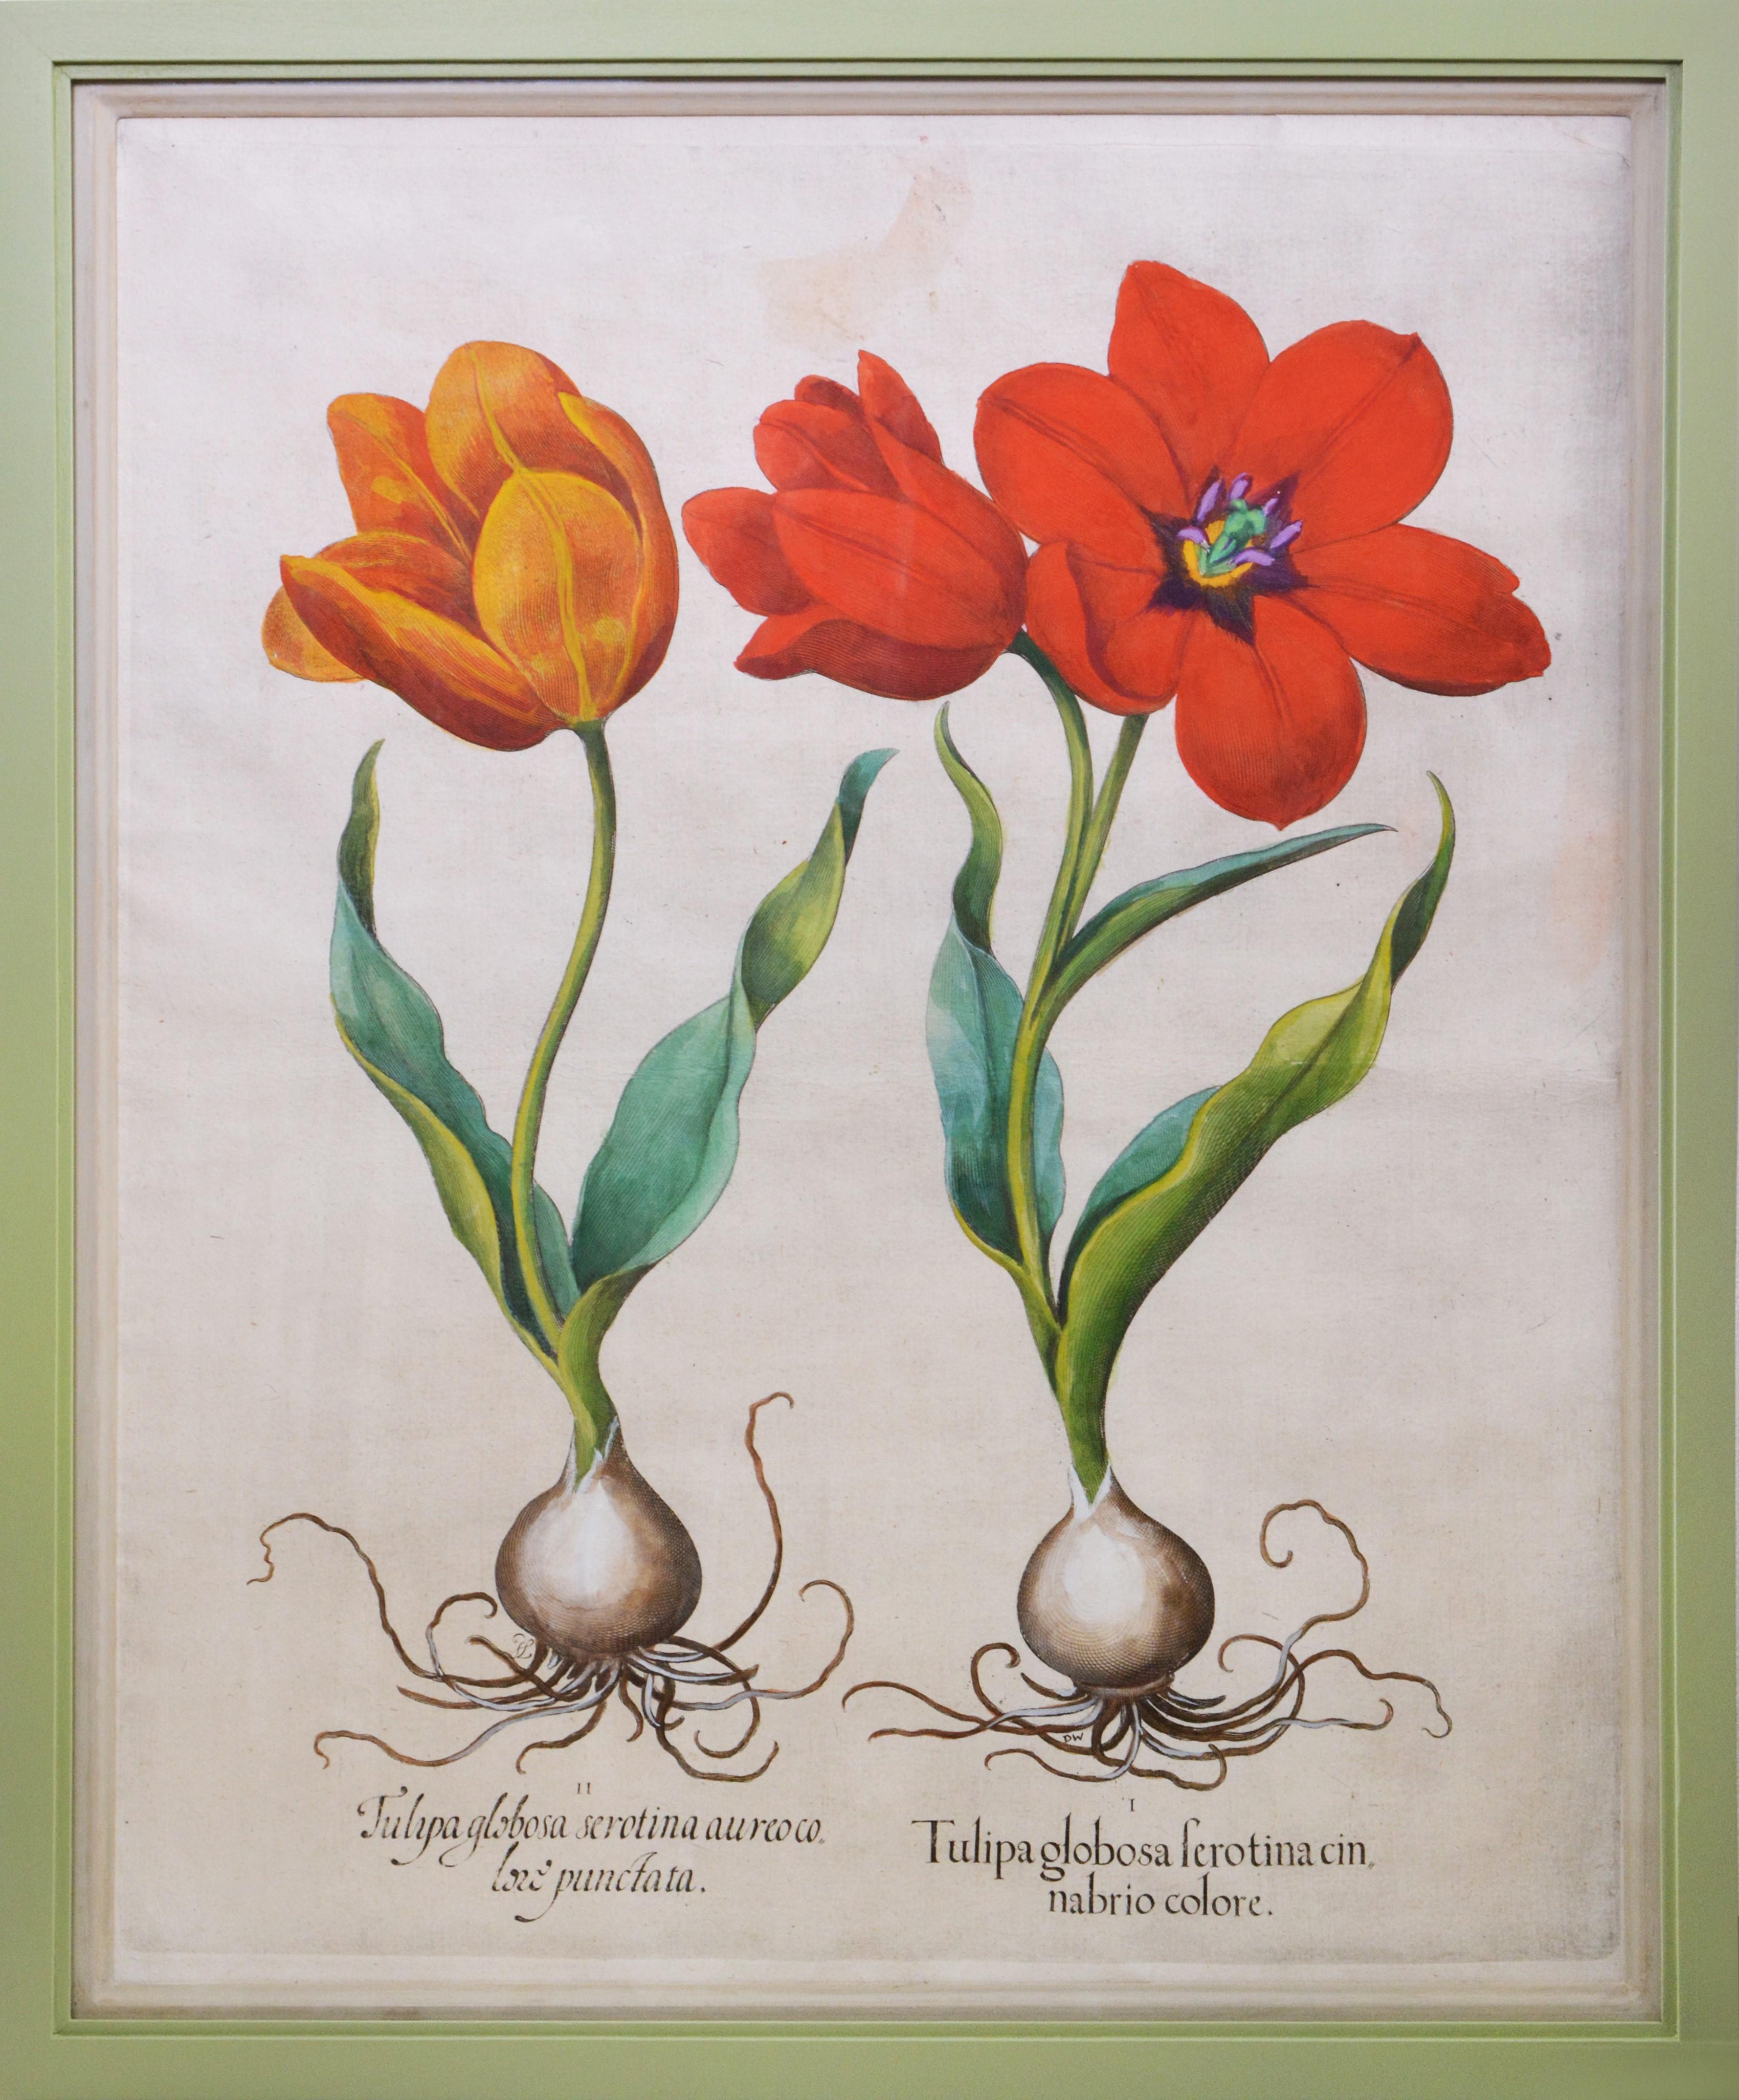 A Pair of Tulips  - Print by (After) Basilius Besler